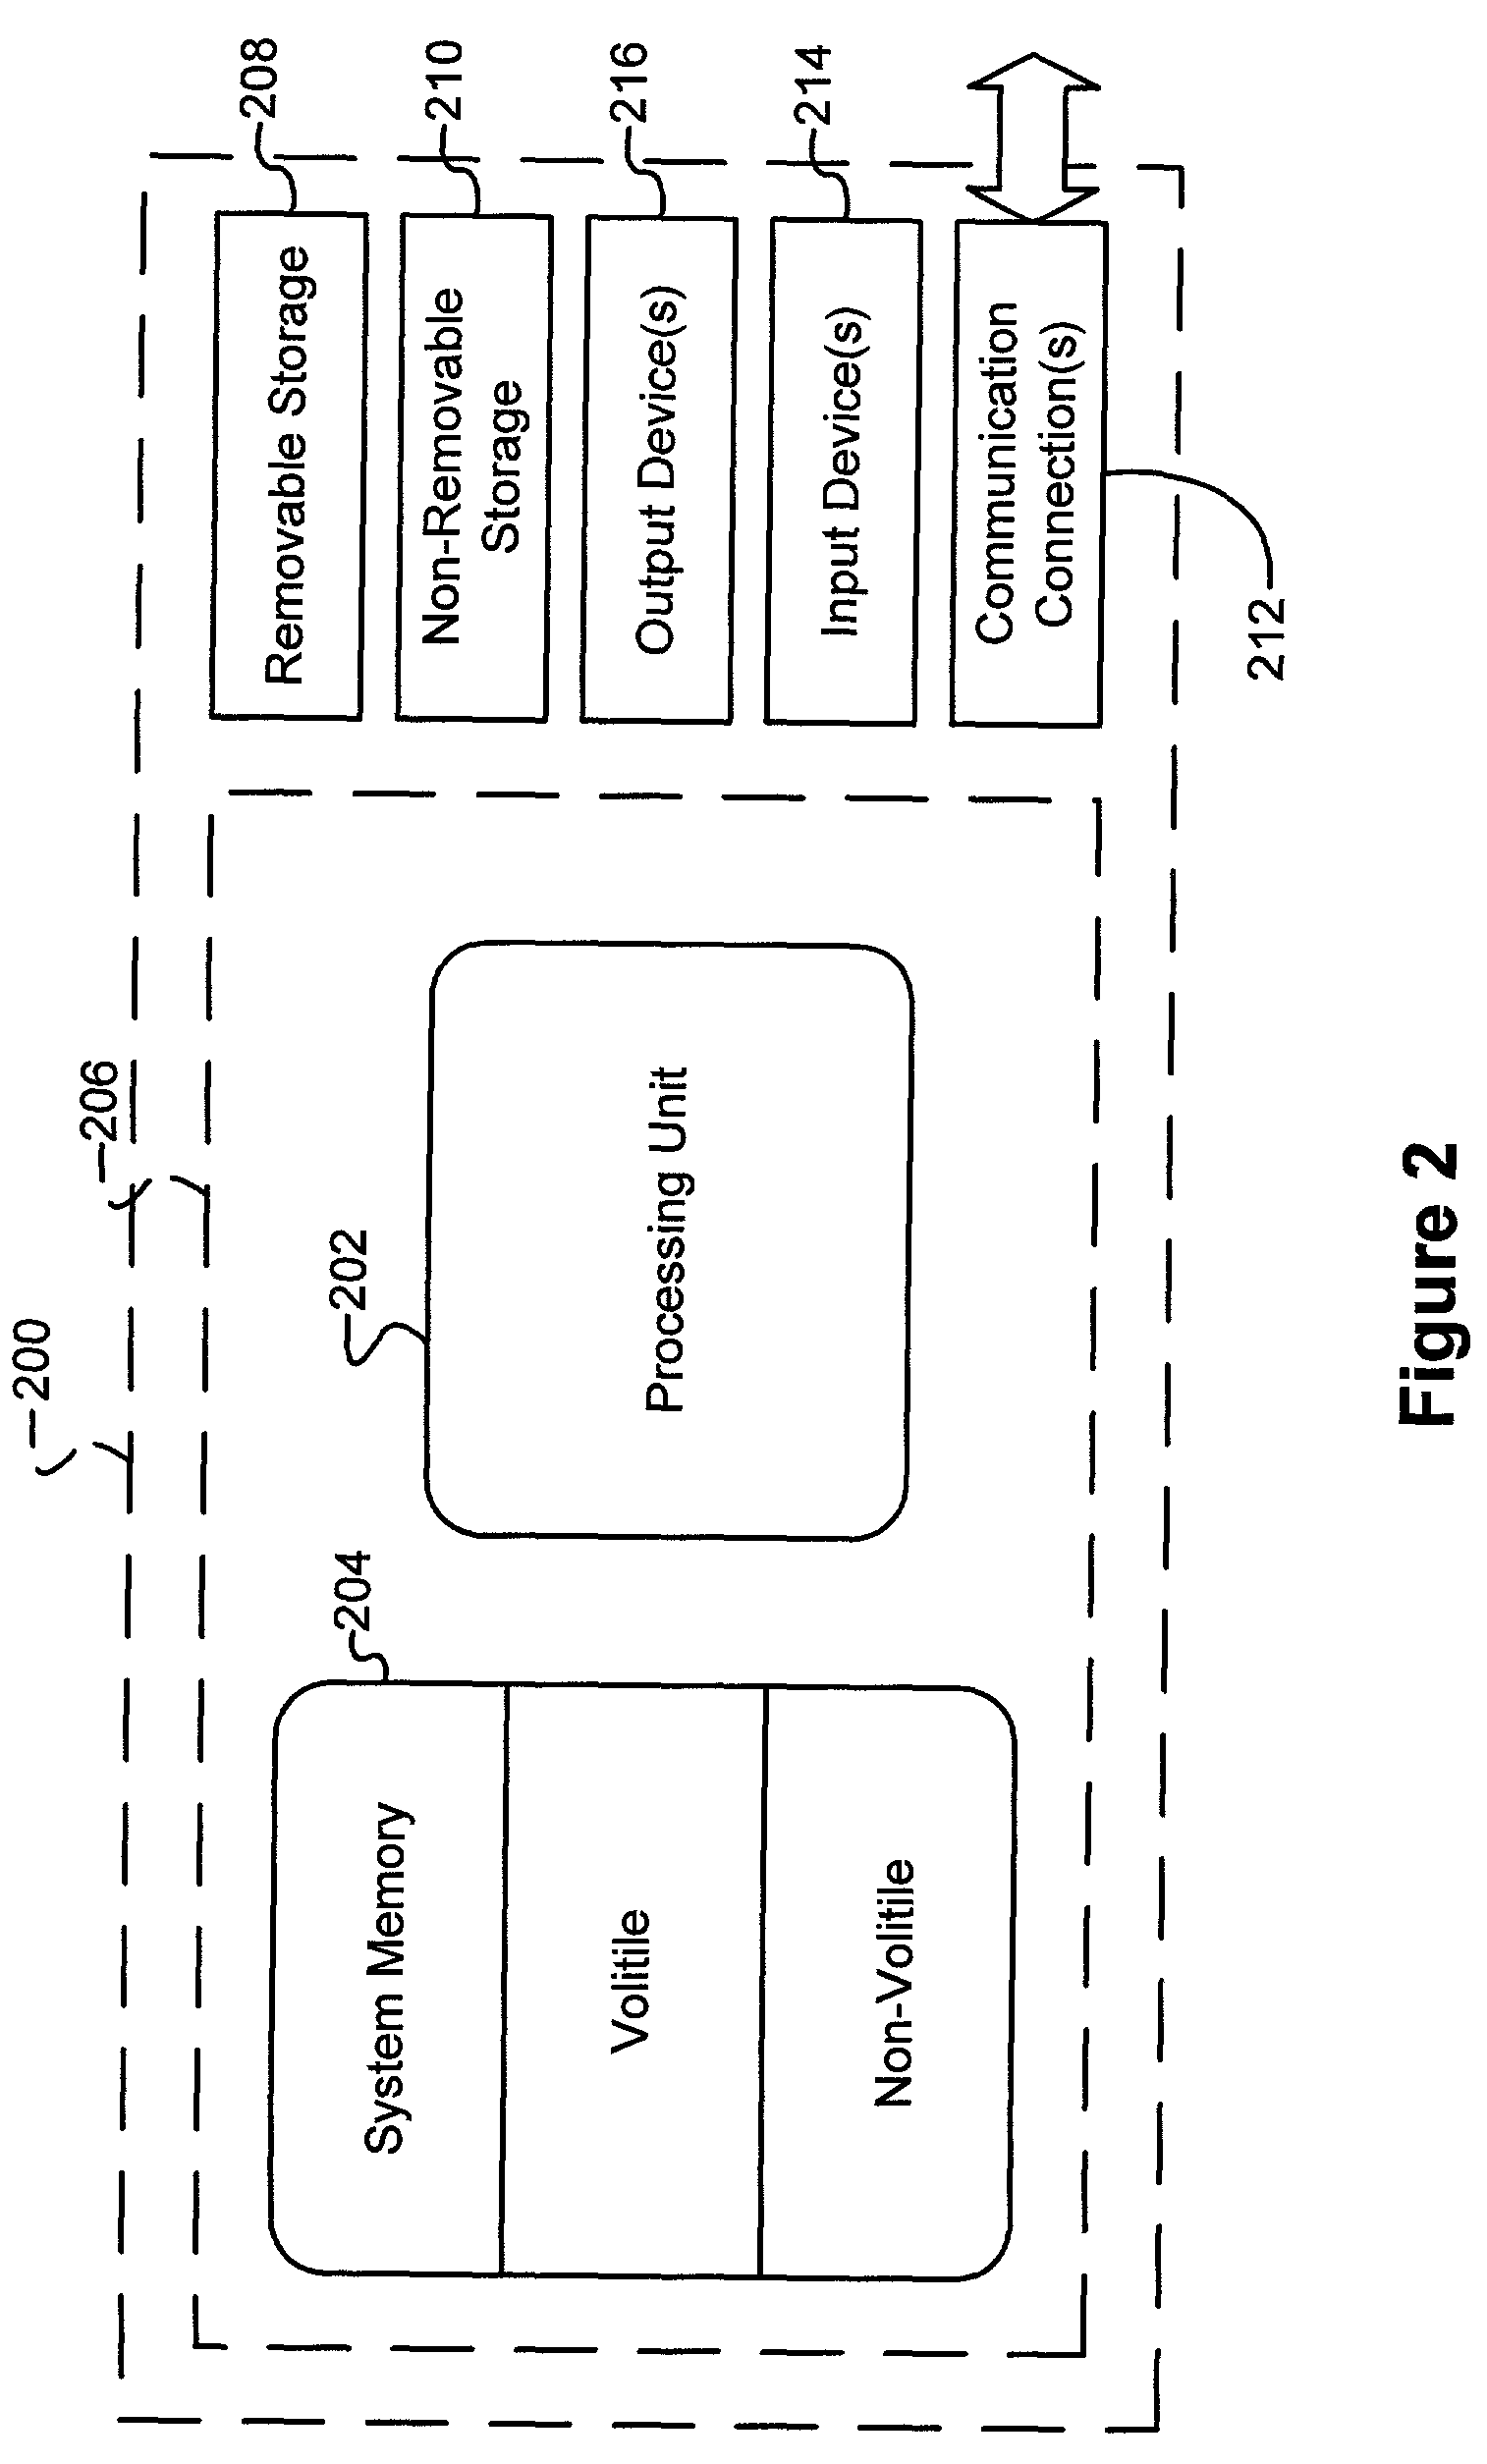 System and method for providing substitute content in place of blocked content